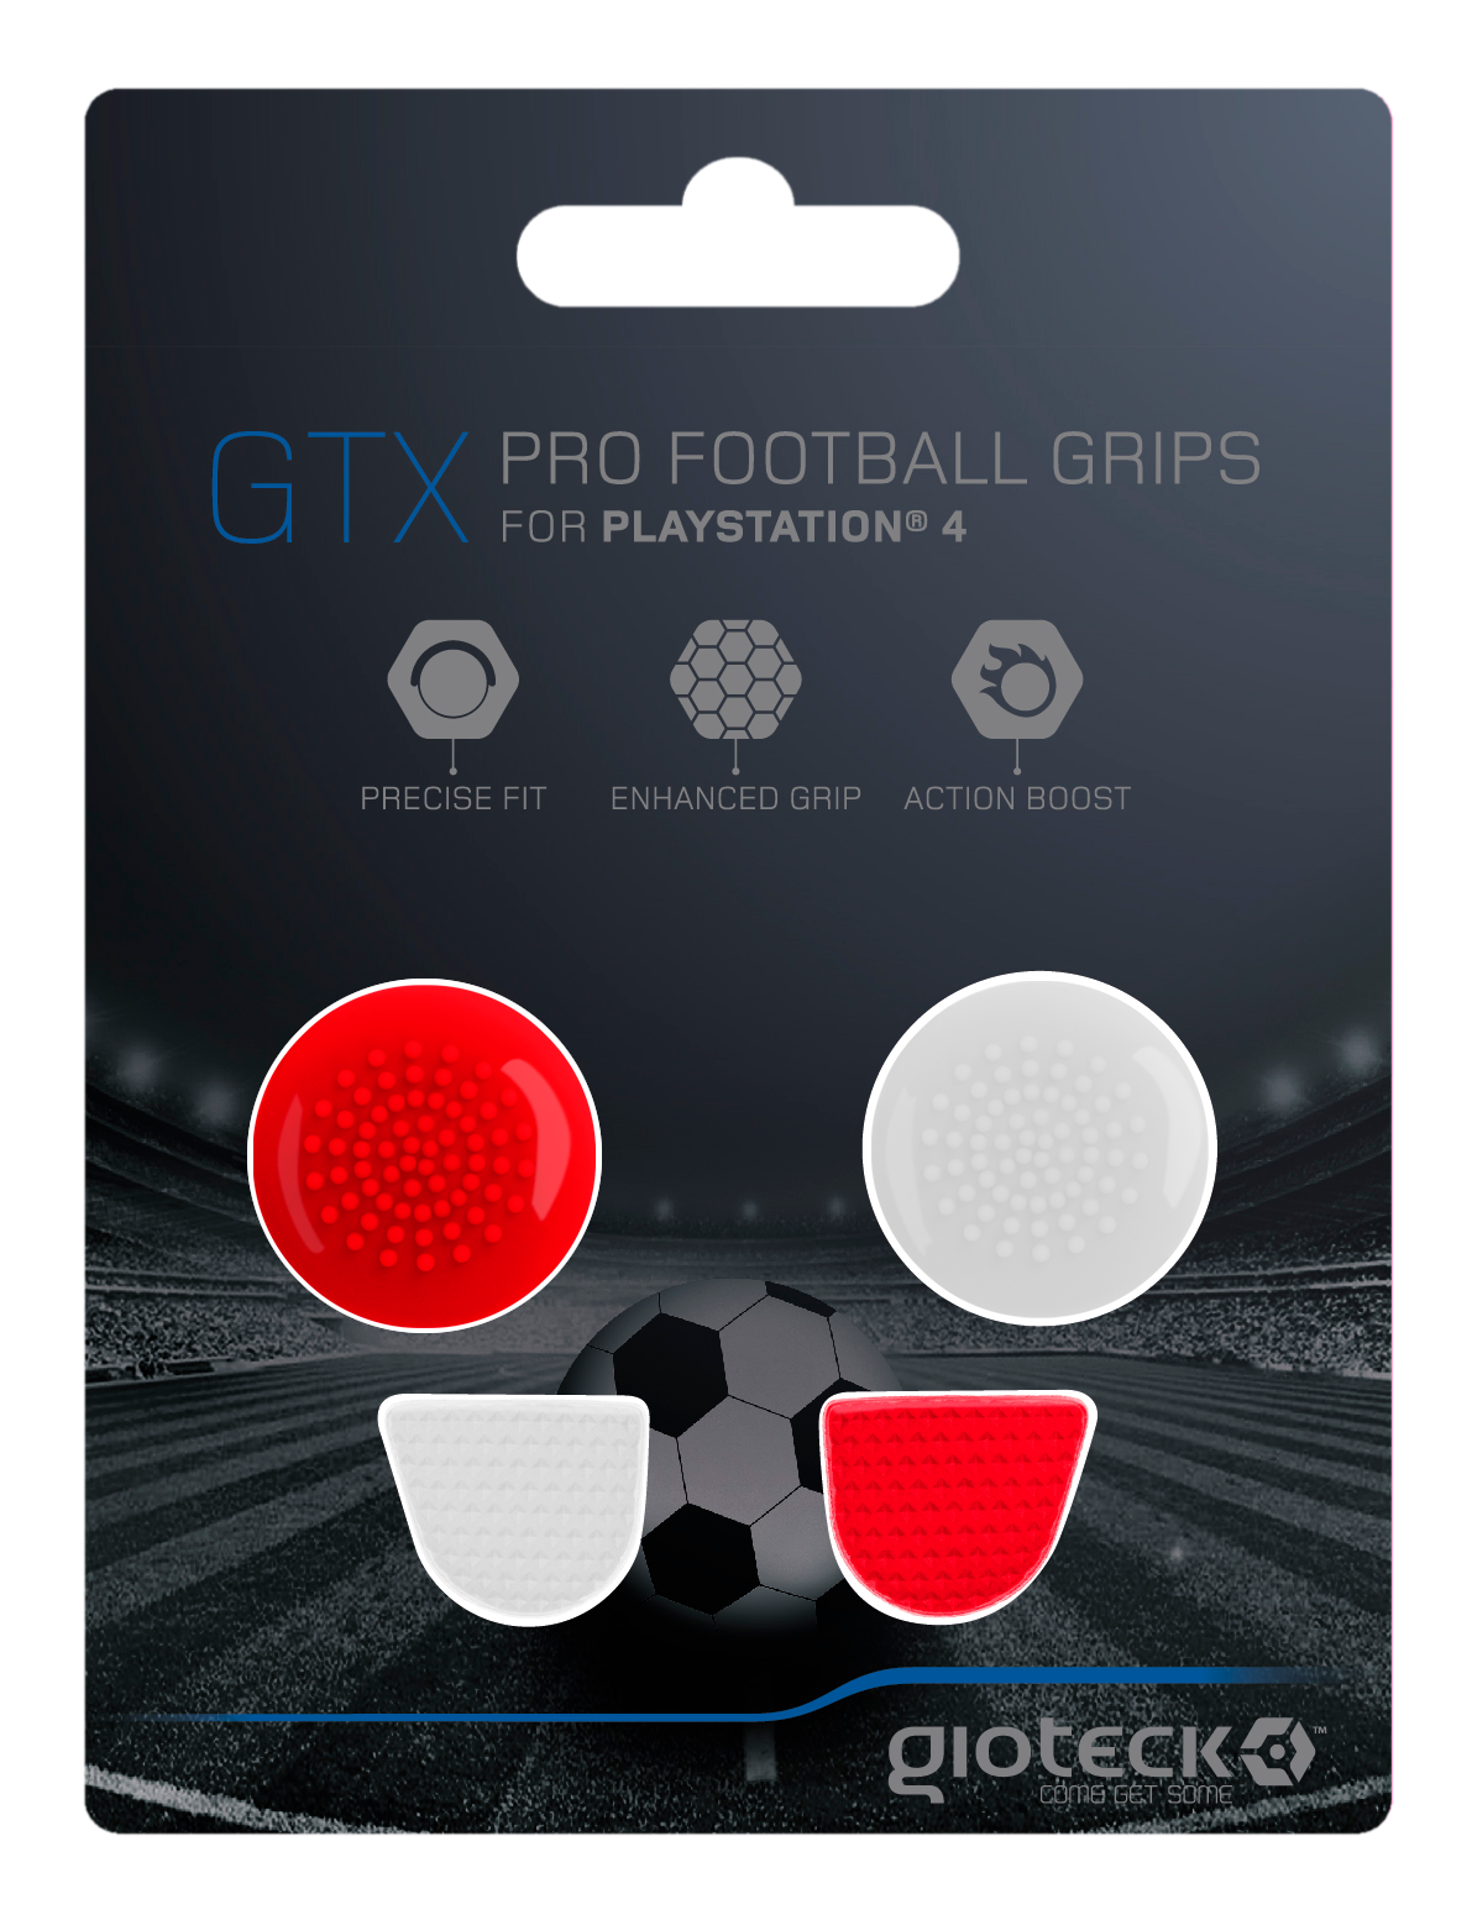 Gioteck - GTX Pro Football Grips voor PS4 Gioteck - GTX Pro Football Grips for PS4